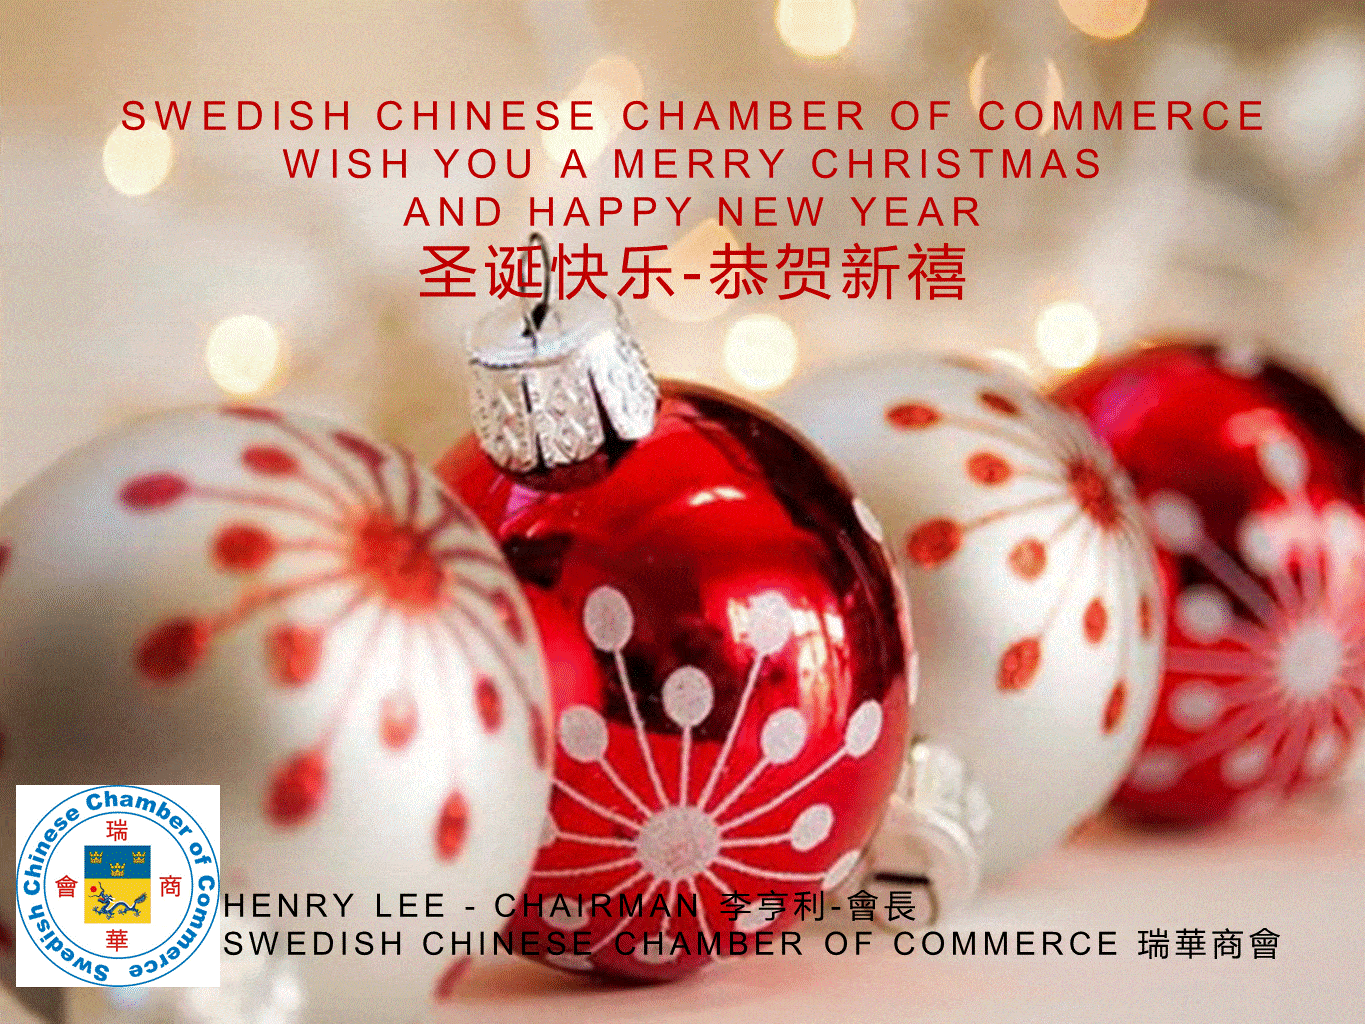 SCCC WISH YOU A MERRY CHRISTMAS AND HAPPY NEW YEAR